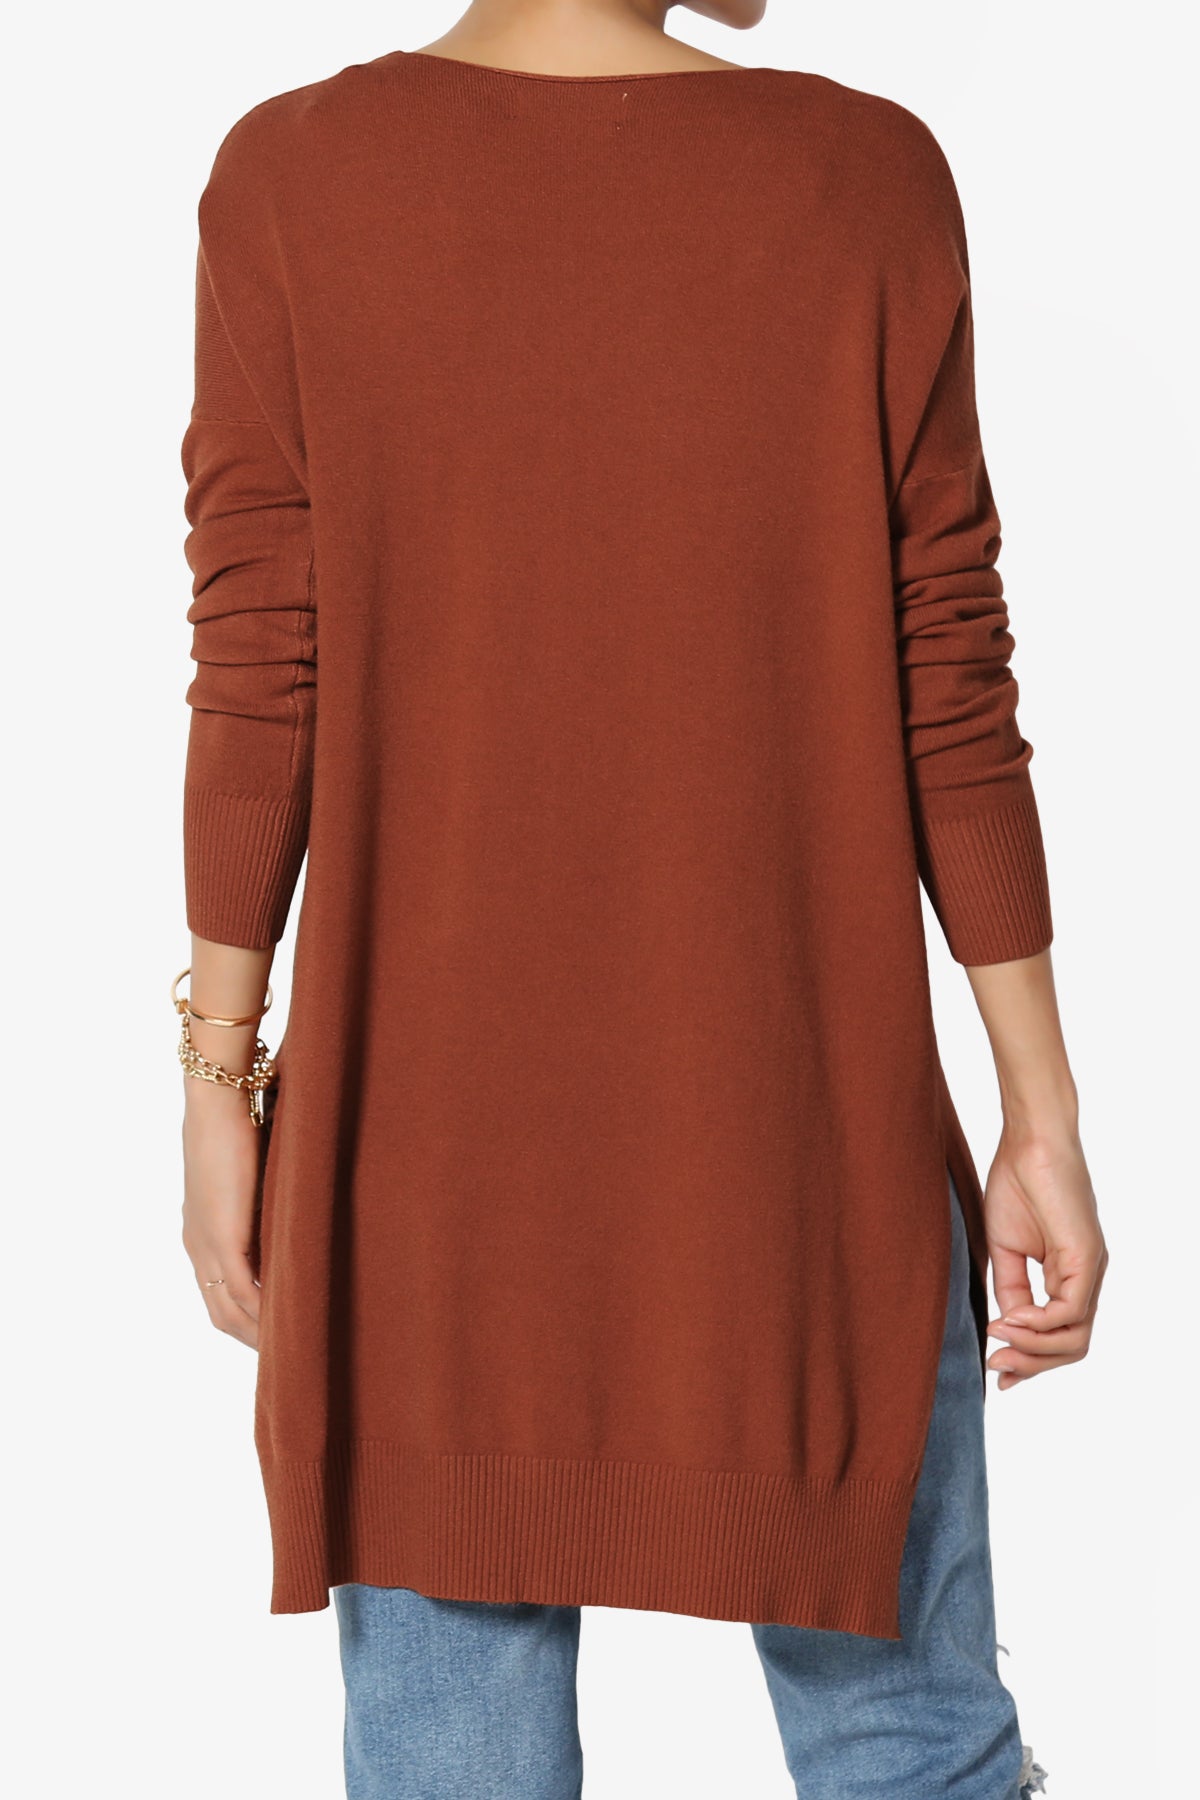 Load image into Gallery viewer, Katana Front Seam V-Neck Knit Sweater DARK RUST_2
